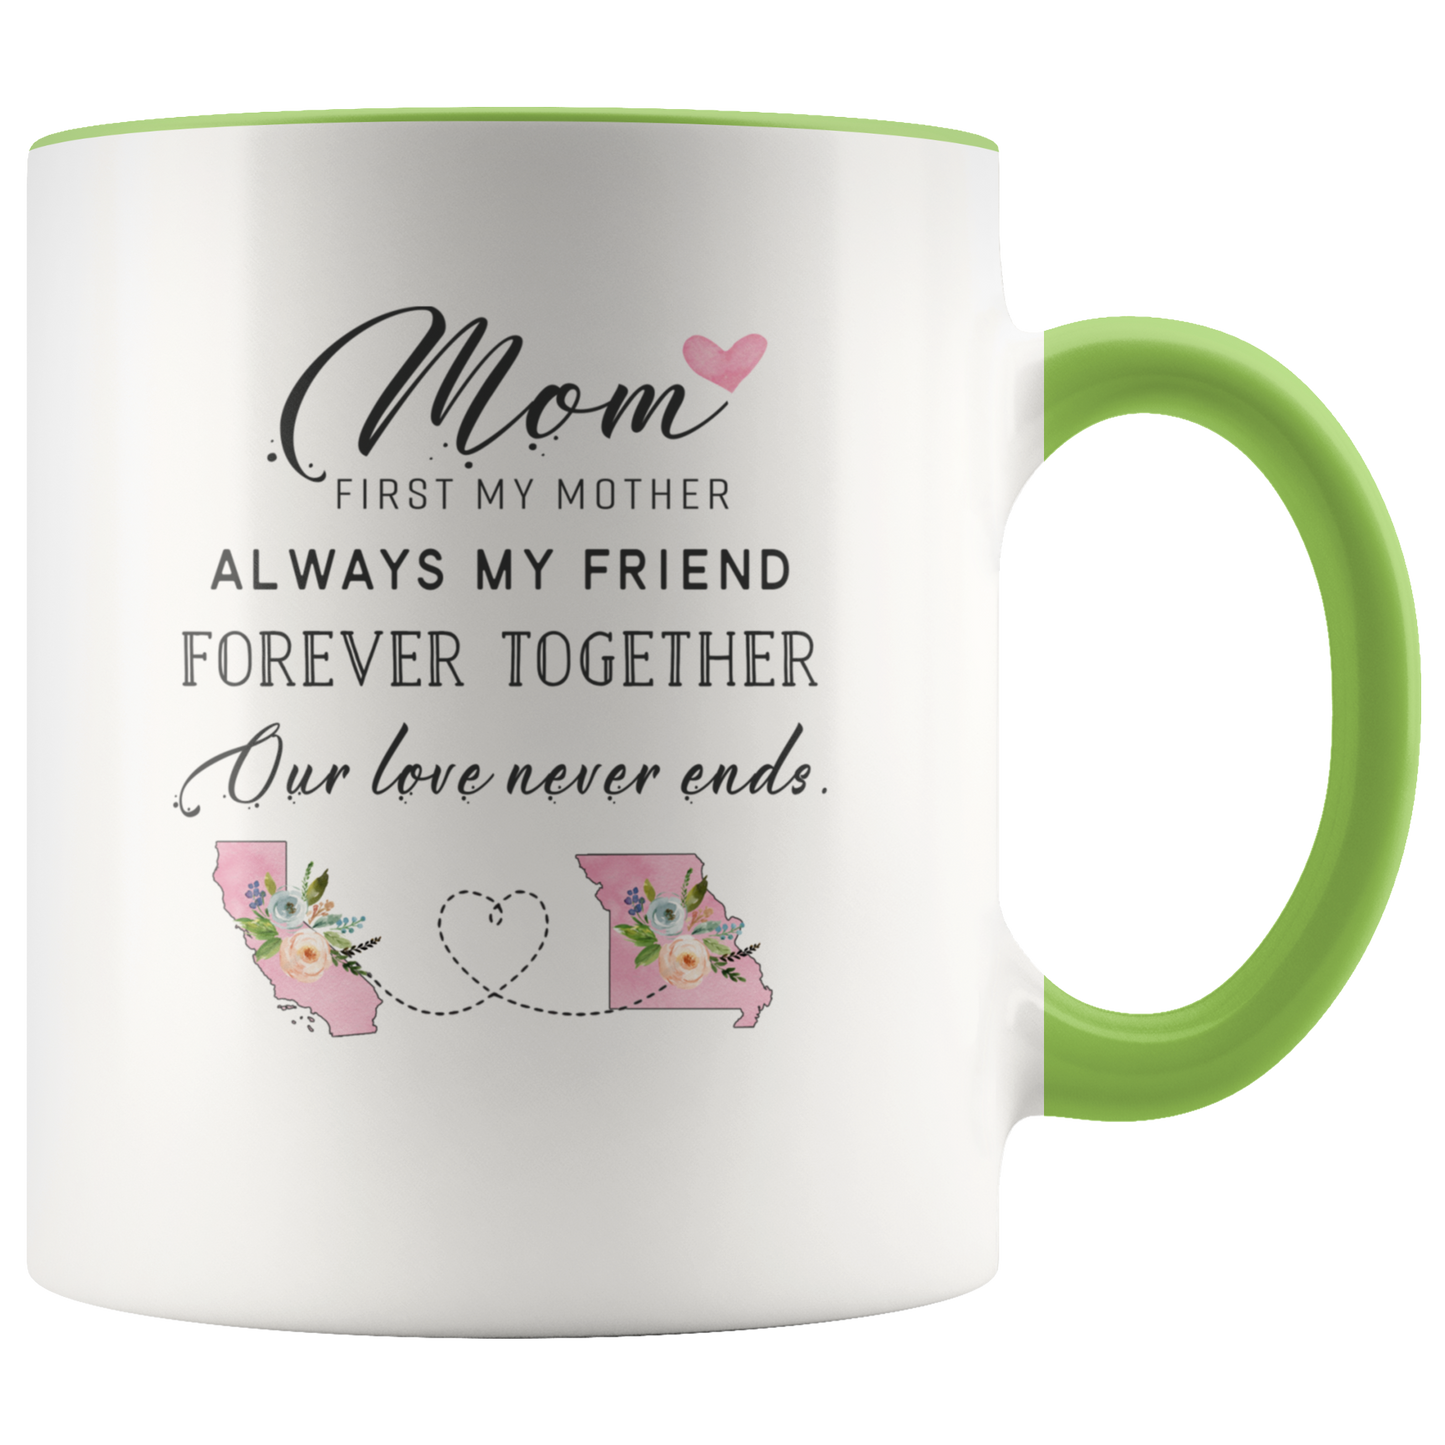 ND-21358810-sp-23735 - [ California | Missouri ]Mothers Day Accent Mug Red - Mom, First My Mother Always My